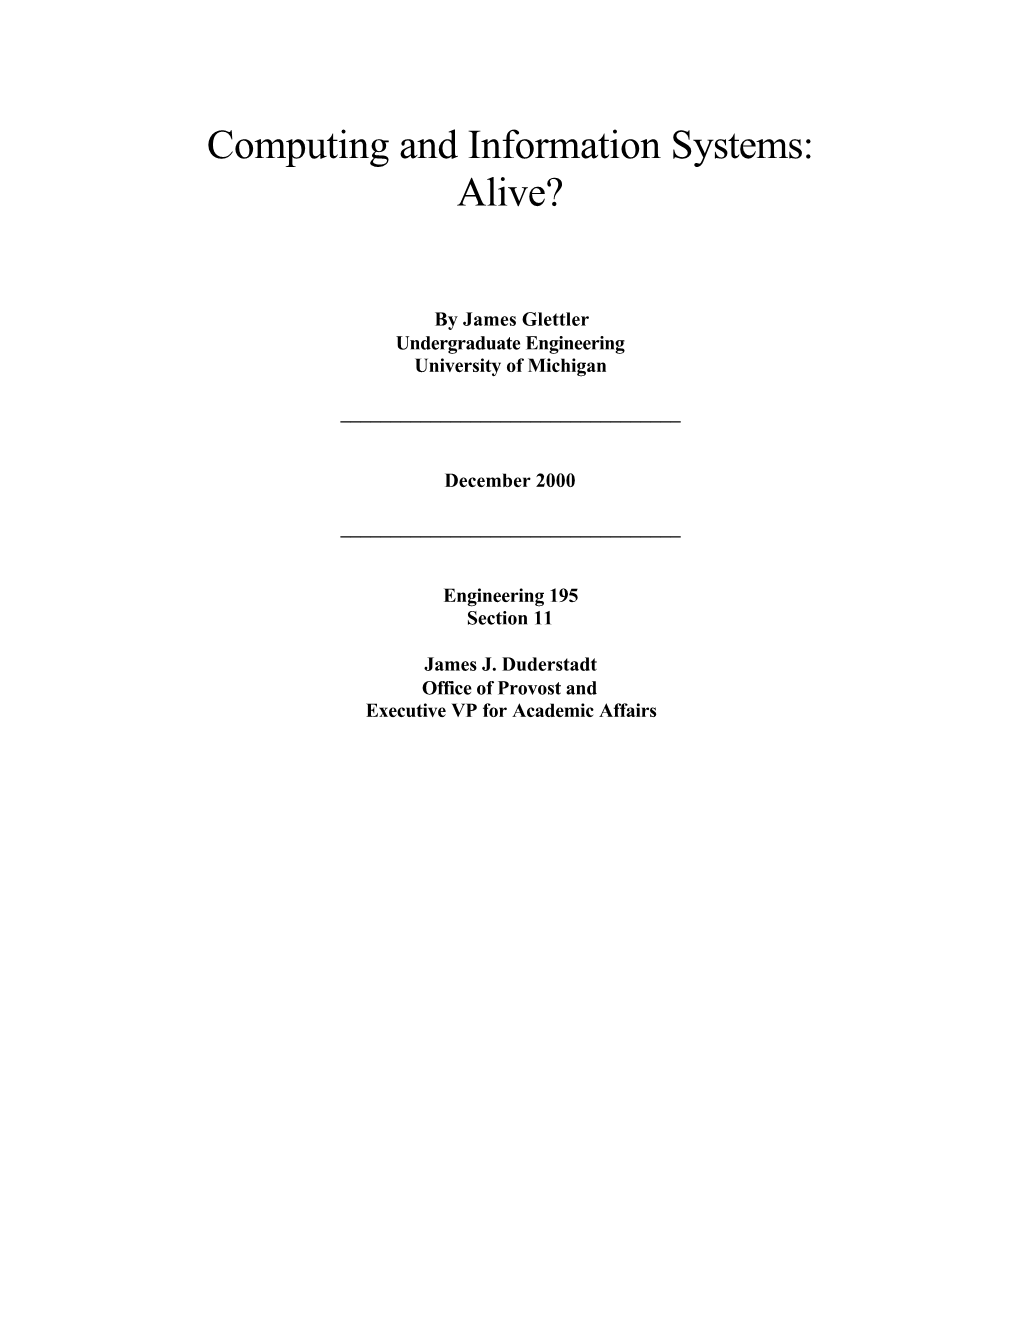 Computing and Information Systems: Alive?